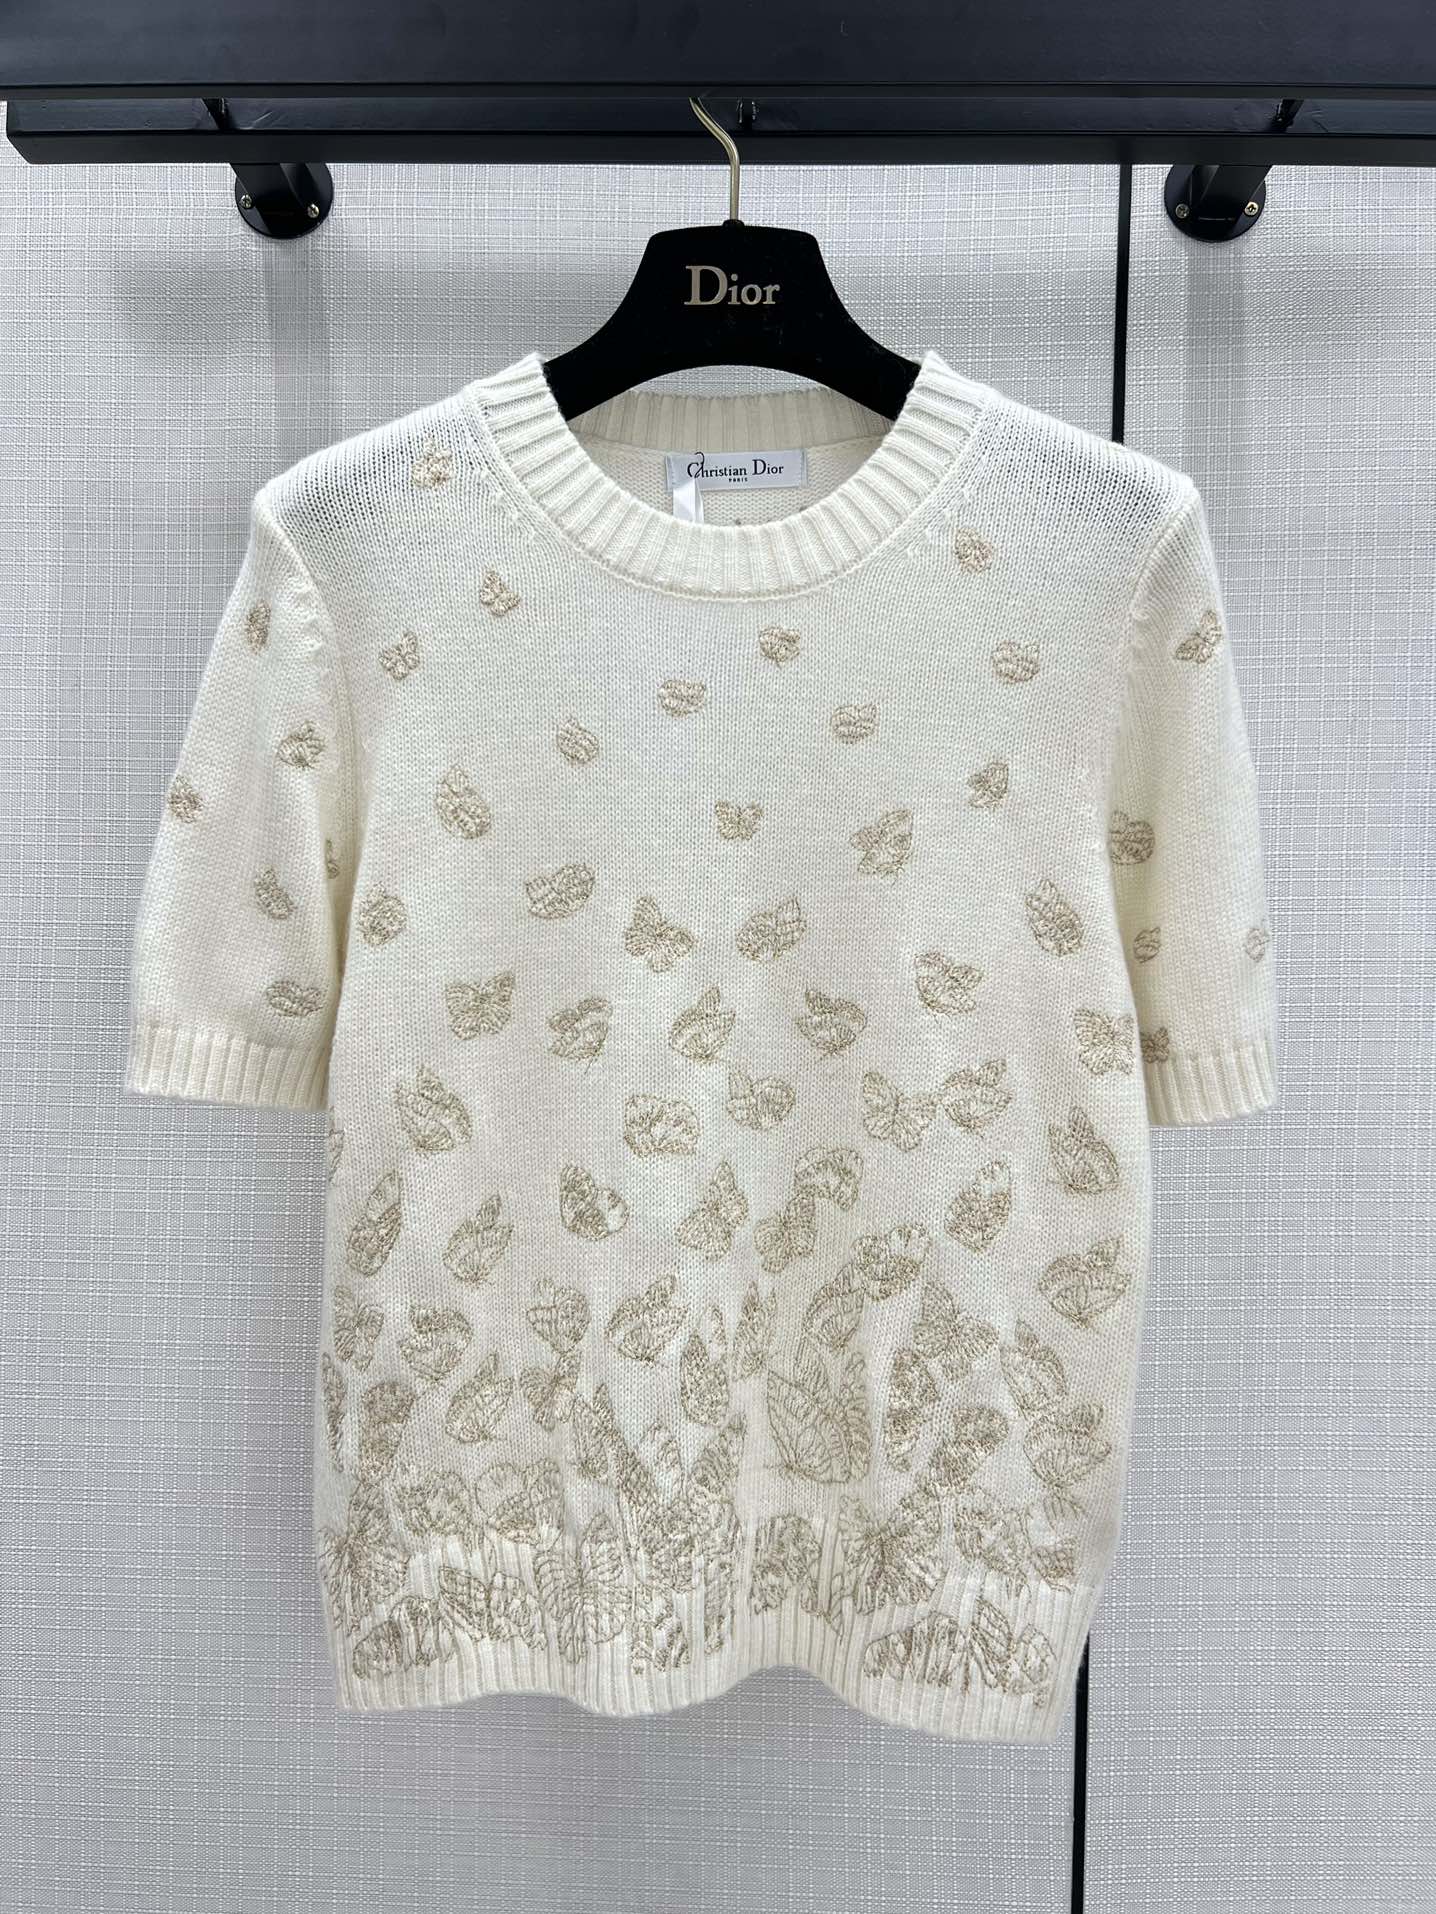 Dior Clothing Shirts & Blouses Sale Outlet Online
 Gold White Yellow Embroidery Cashmere Knitting Wool Spring Collection